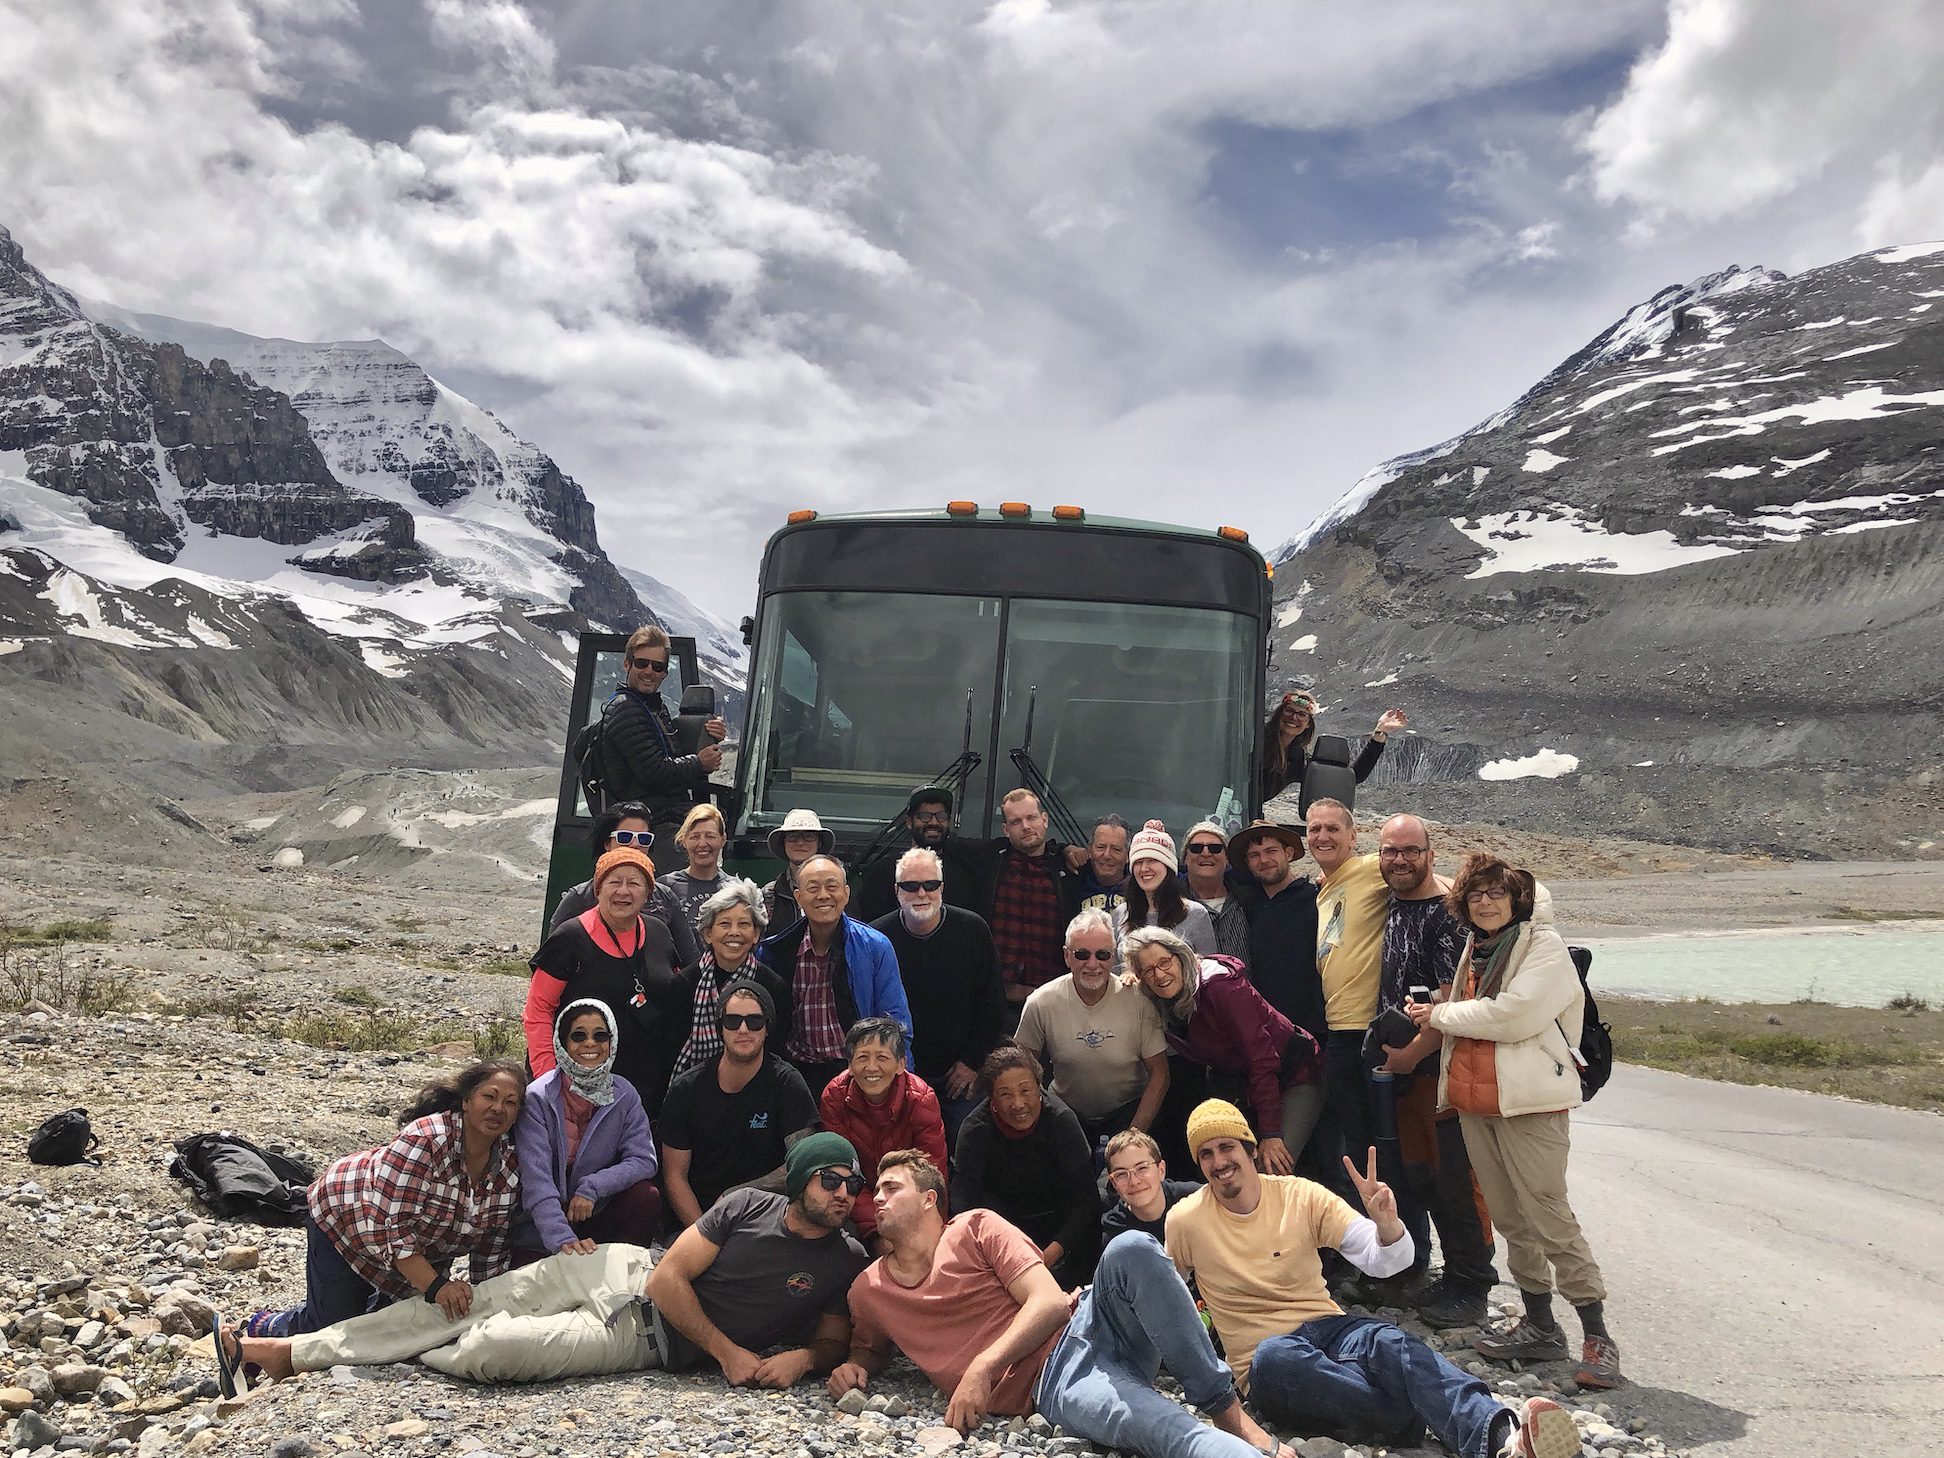 Experience Alaska group poses in front of their adventure coach at the face of a glacier.